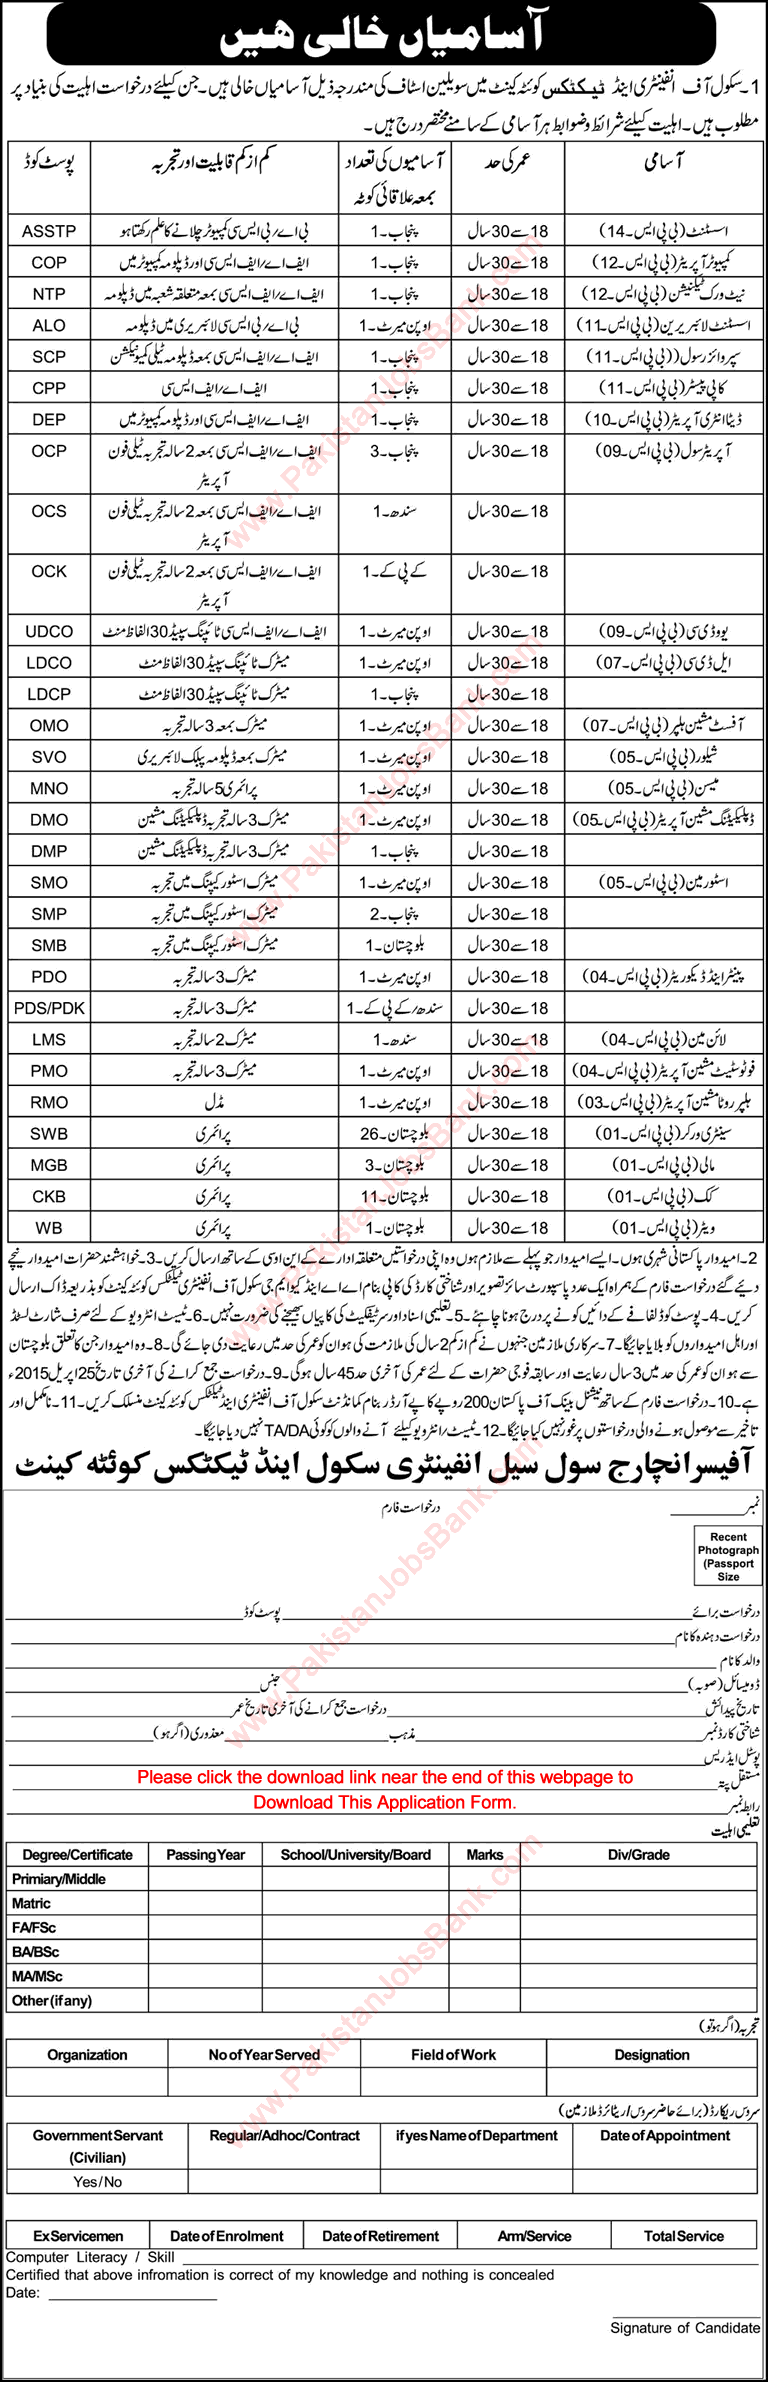 School of Infantry and Tactics Quetta Jobs 2015 April Application Form Download Latest